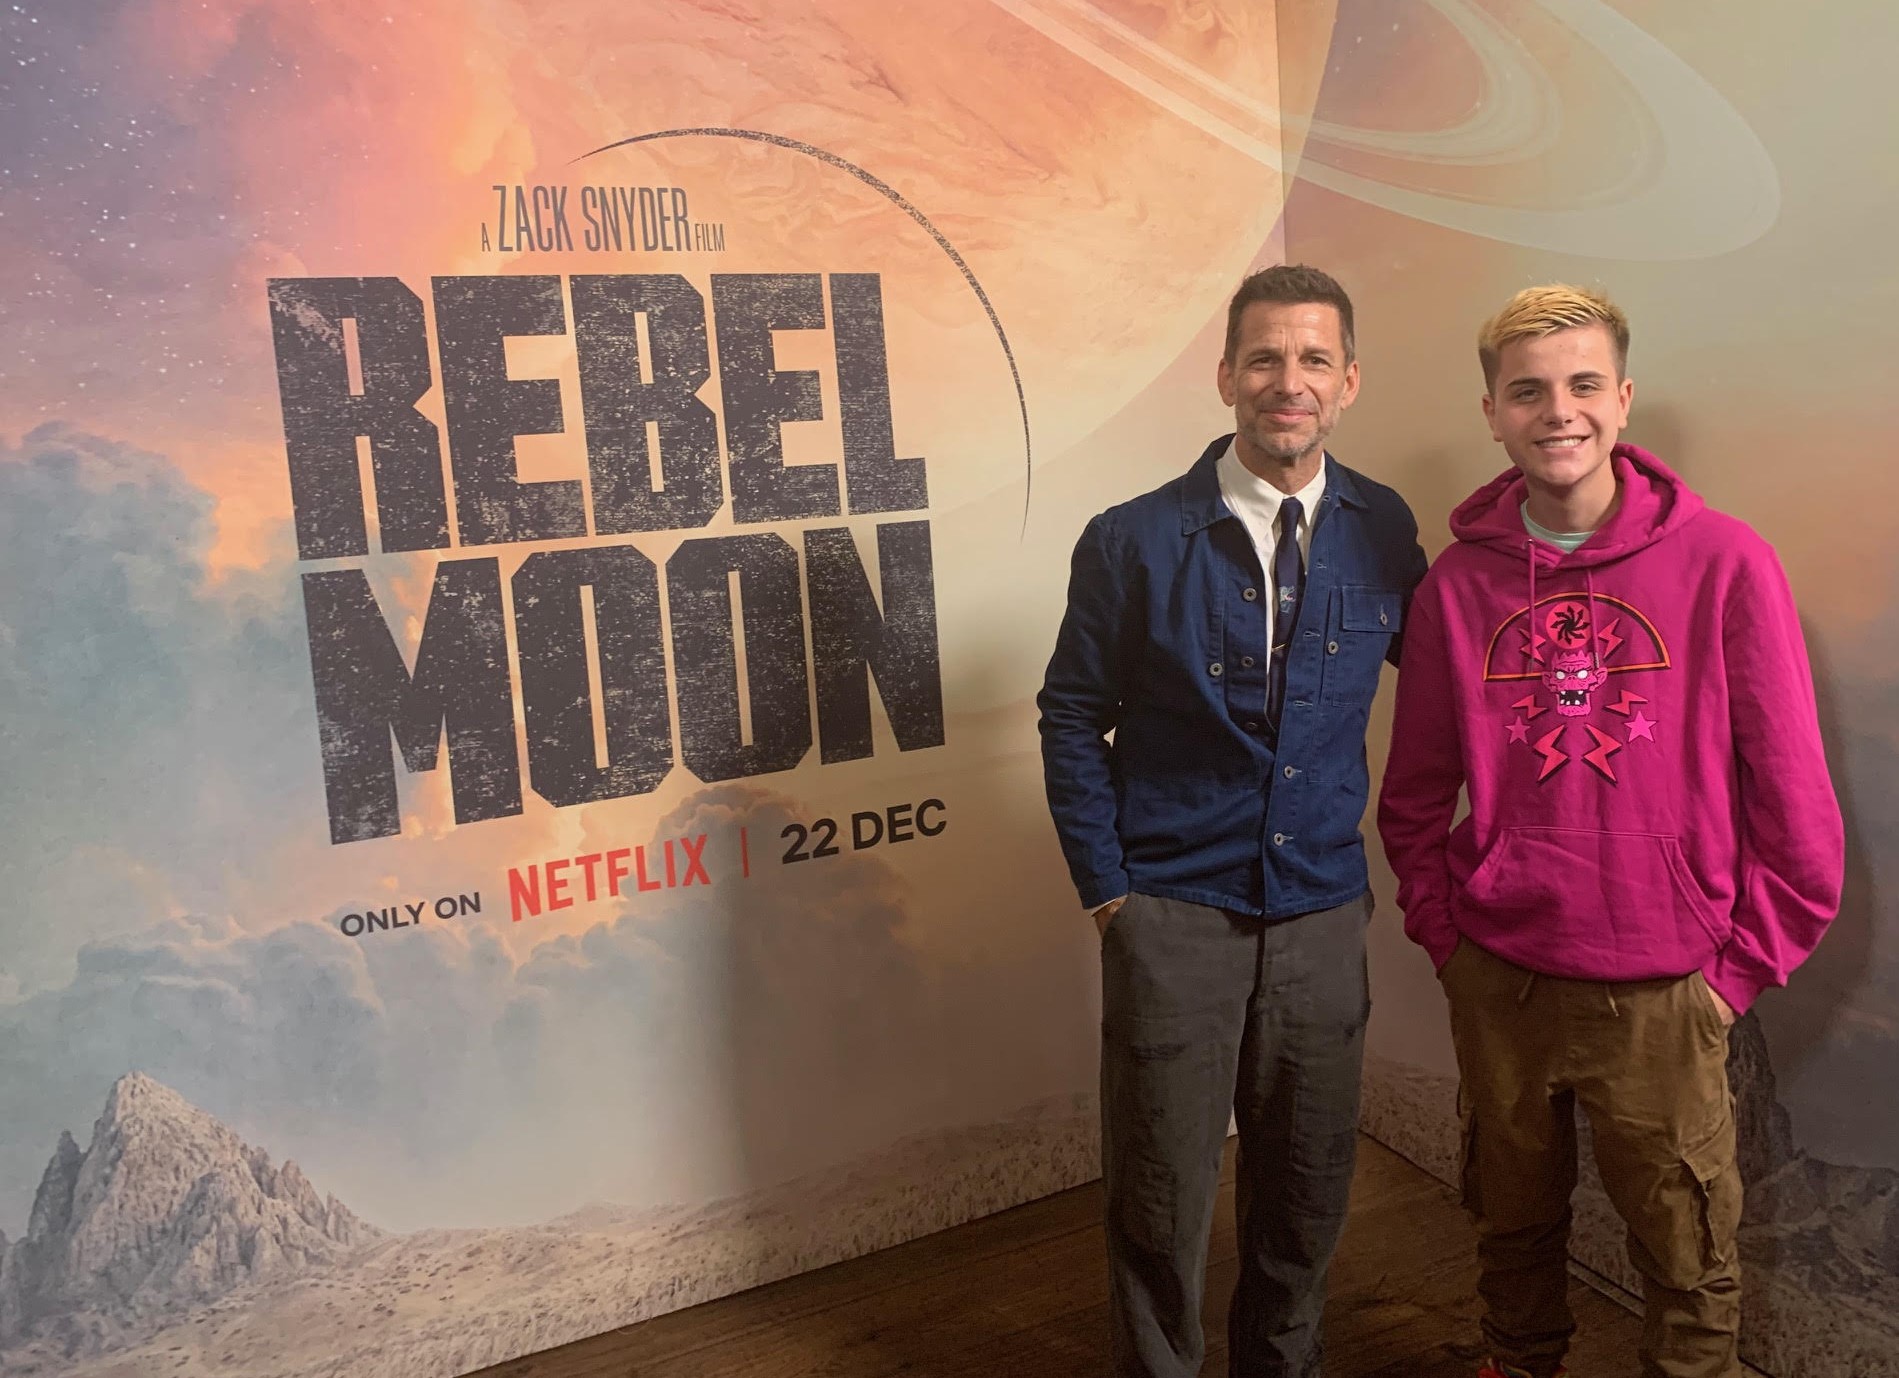 Con at the Zack Snyder Rebel Moon Trailer Launch Event